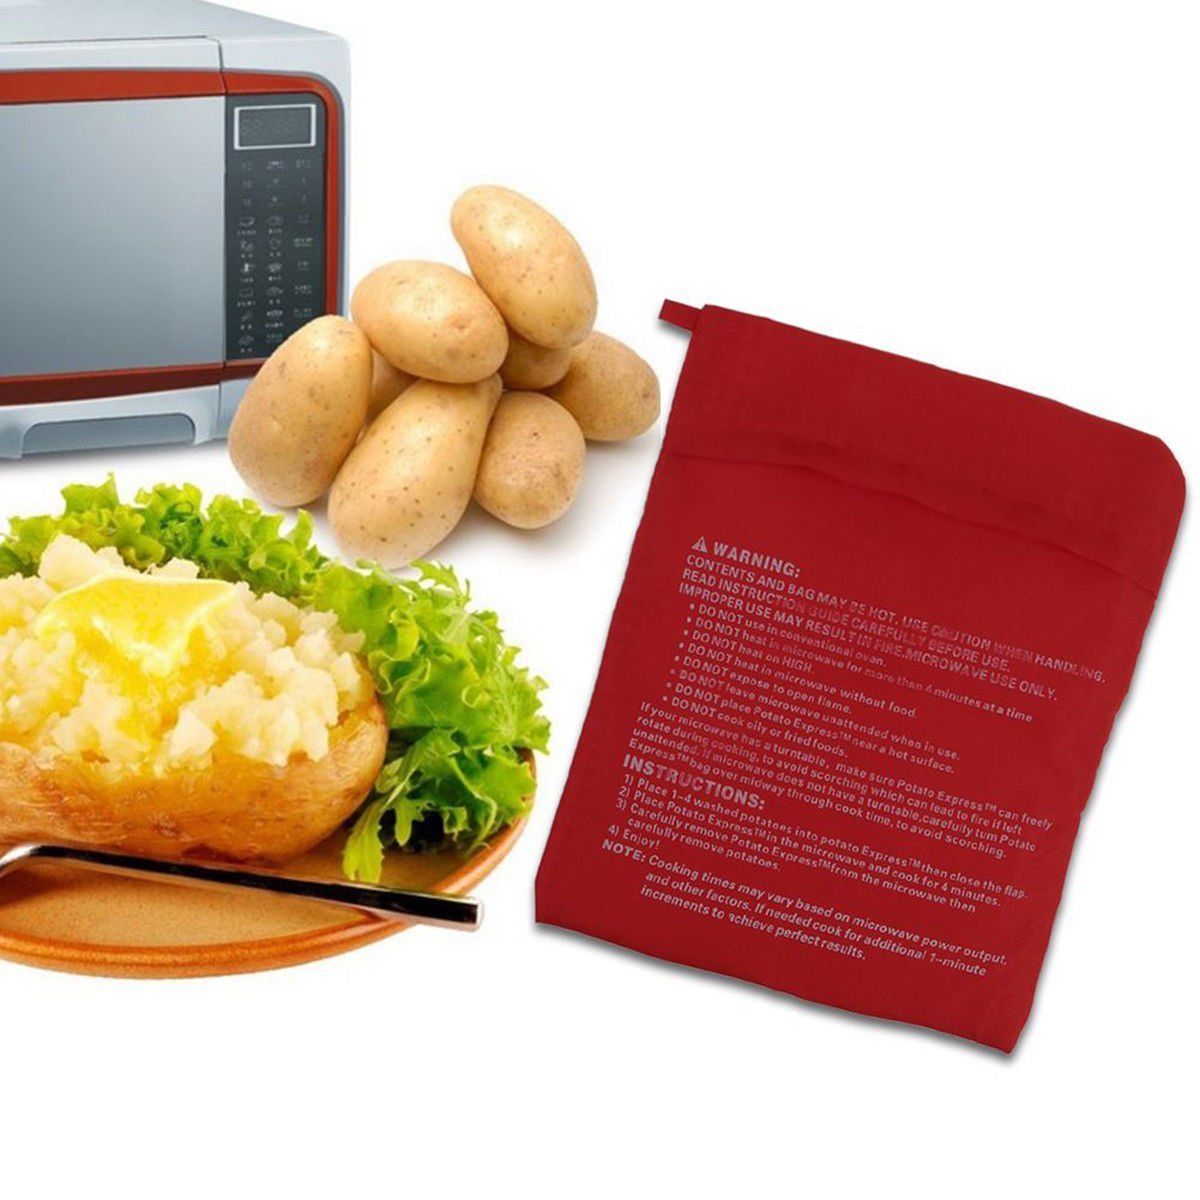 Red Reusable Microwave Potato Bag Baking Cooker Bag Rice Pocket 4 Minutes Oven Easy Quick Cooking Tools Kitchen Gadgets